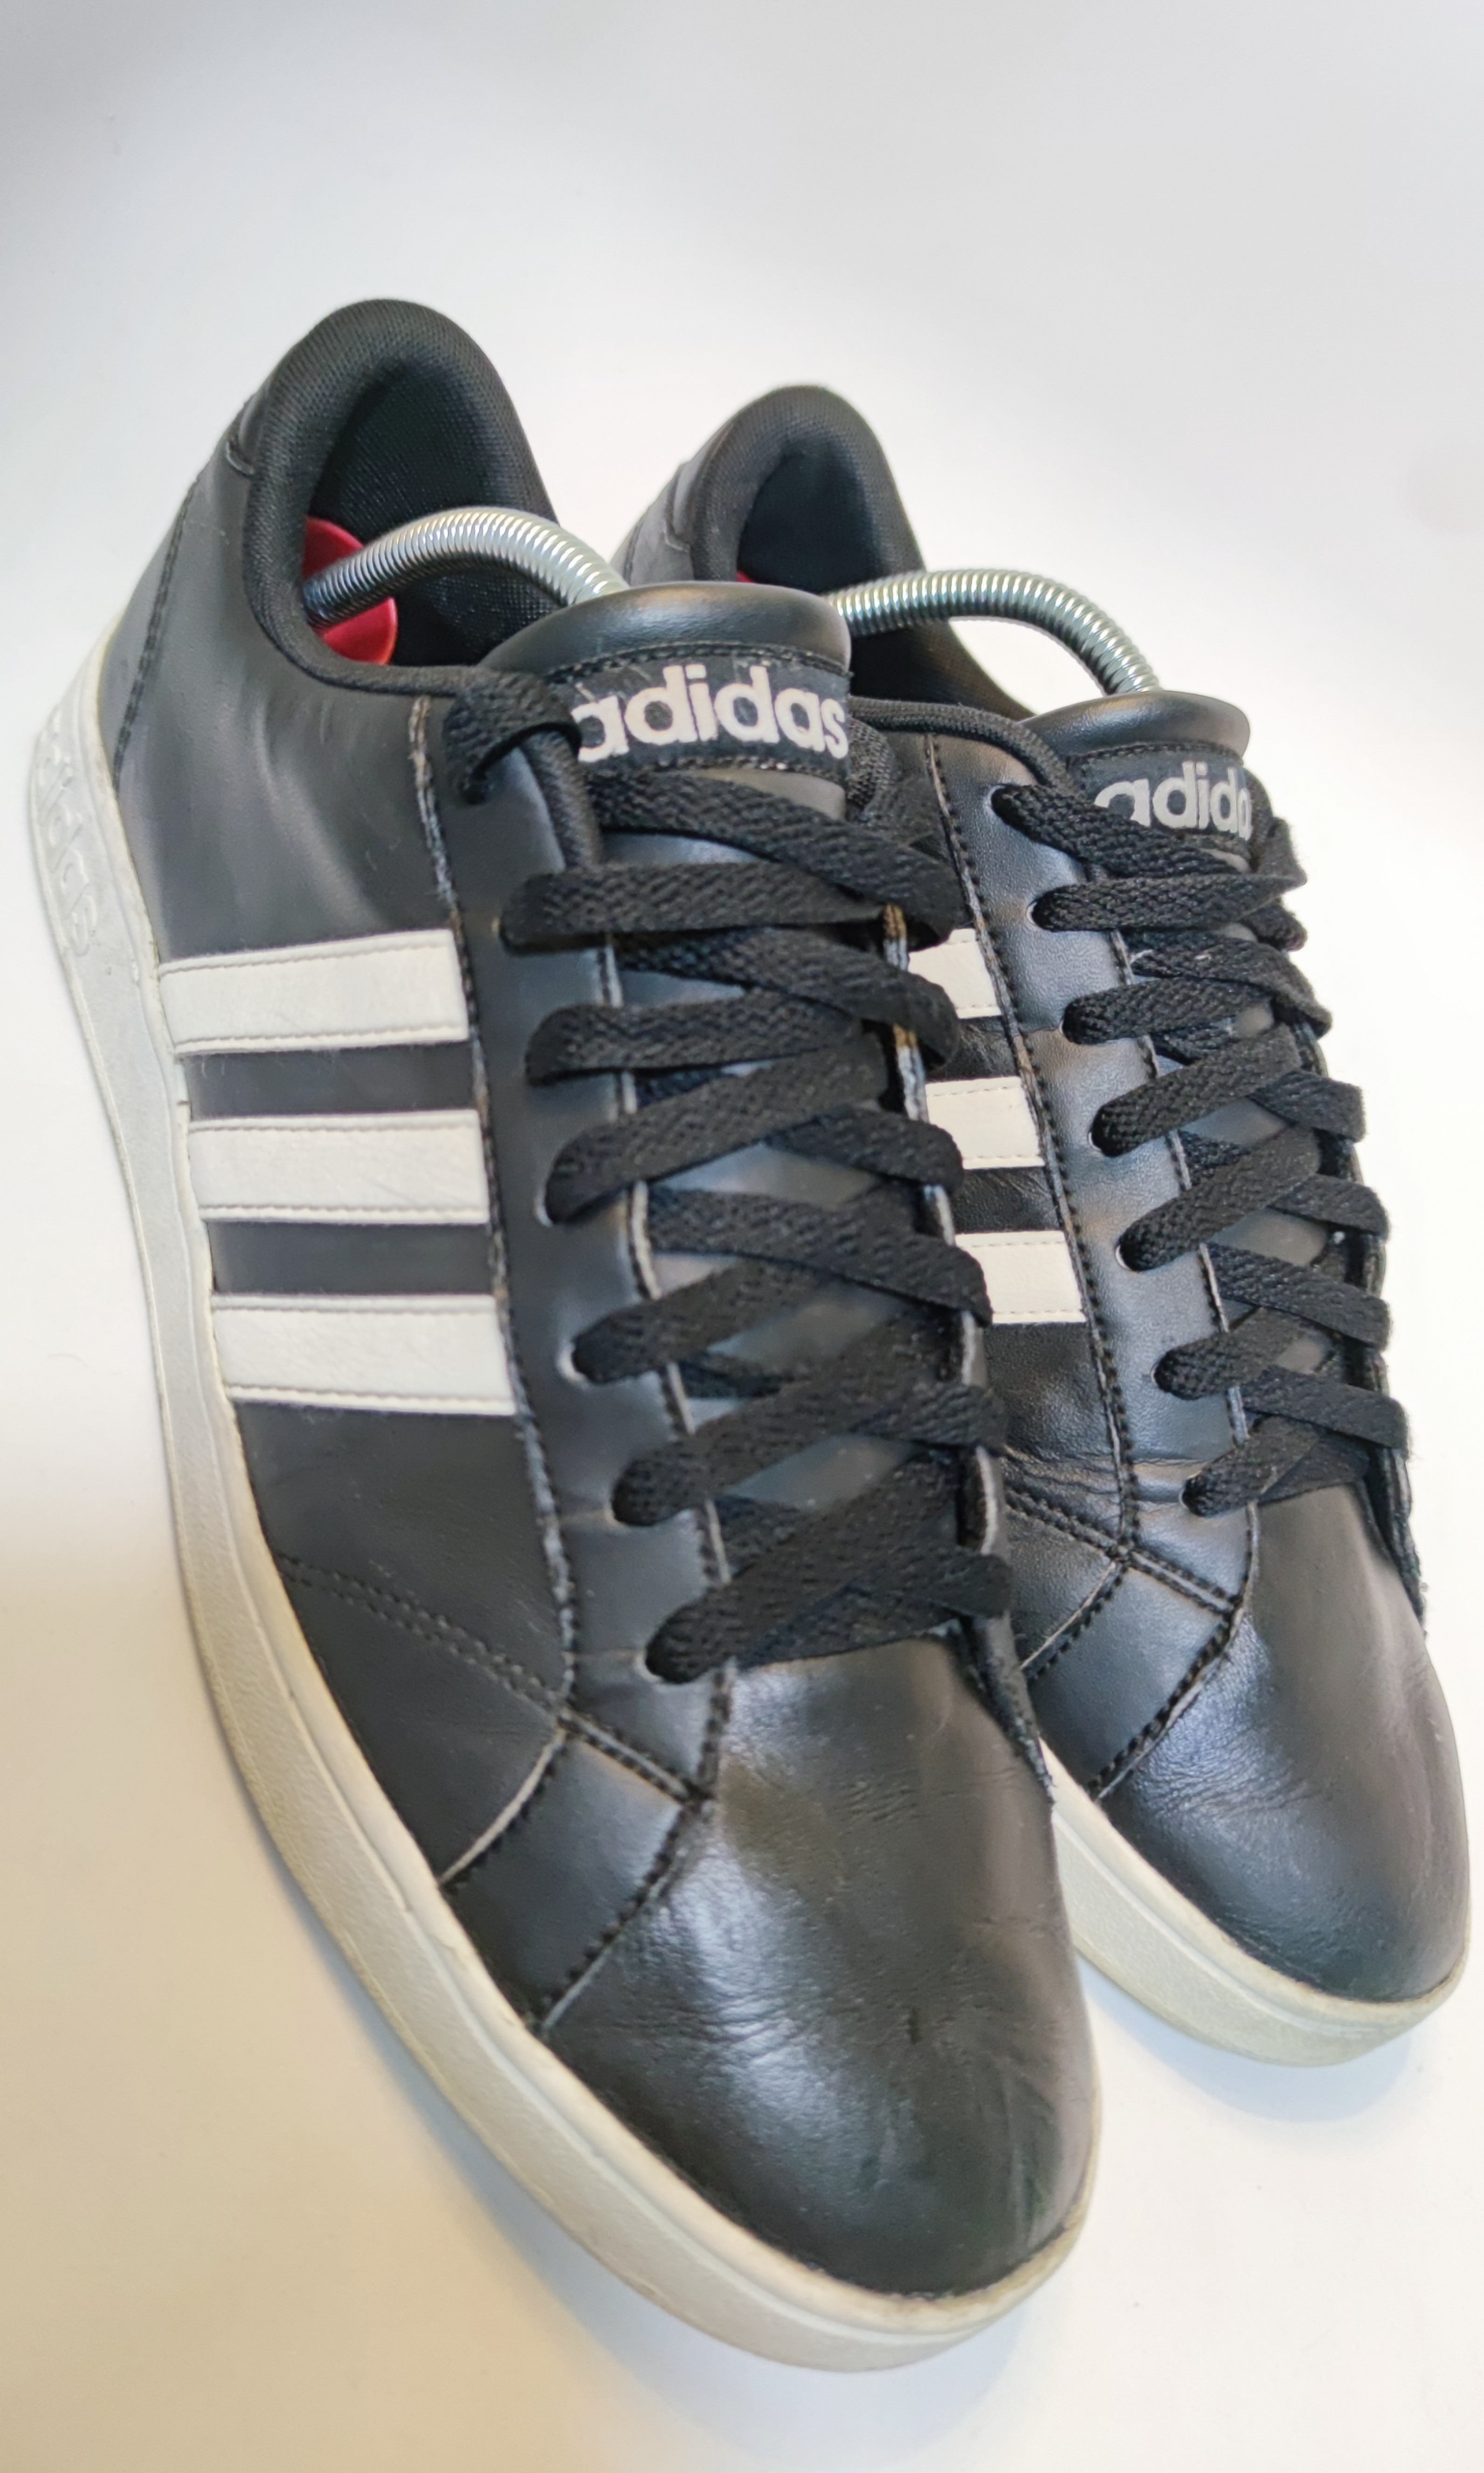 frecuentemente Absoluto Caso Adidas neo leather, Men's Fashion, Footwear, Sneakers on Carousell